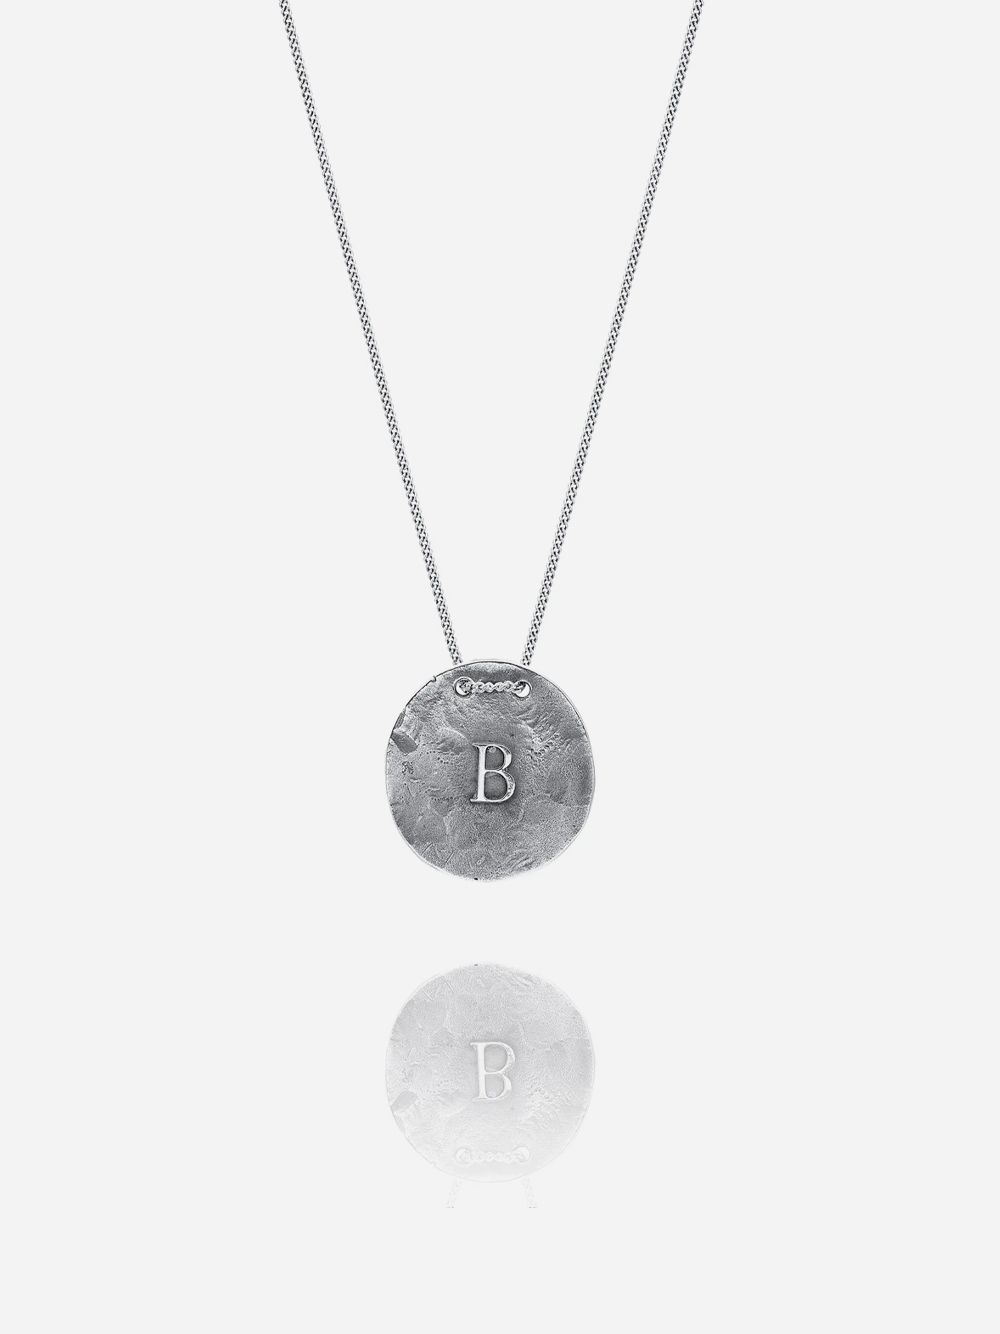 Silver B Necklace